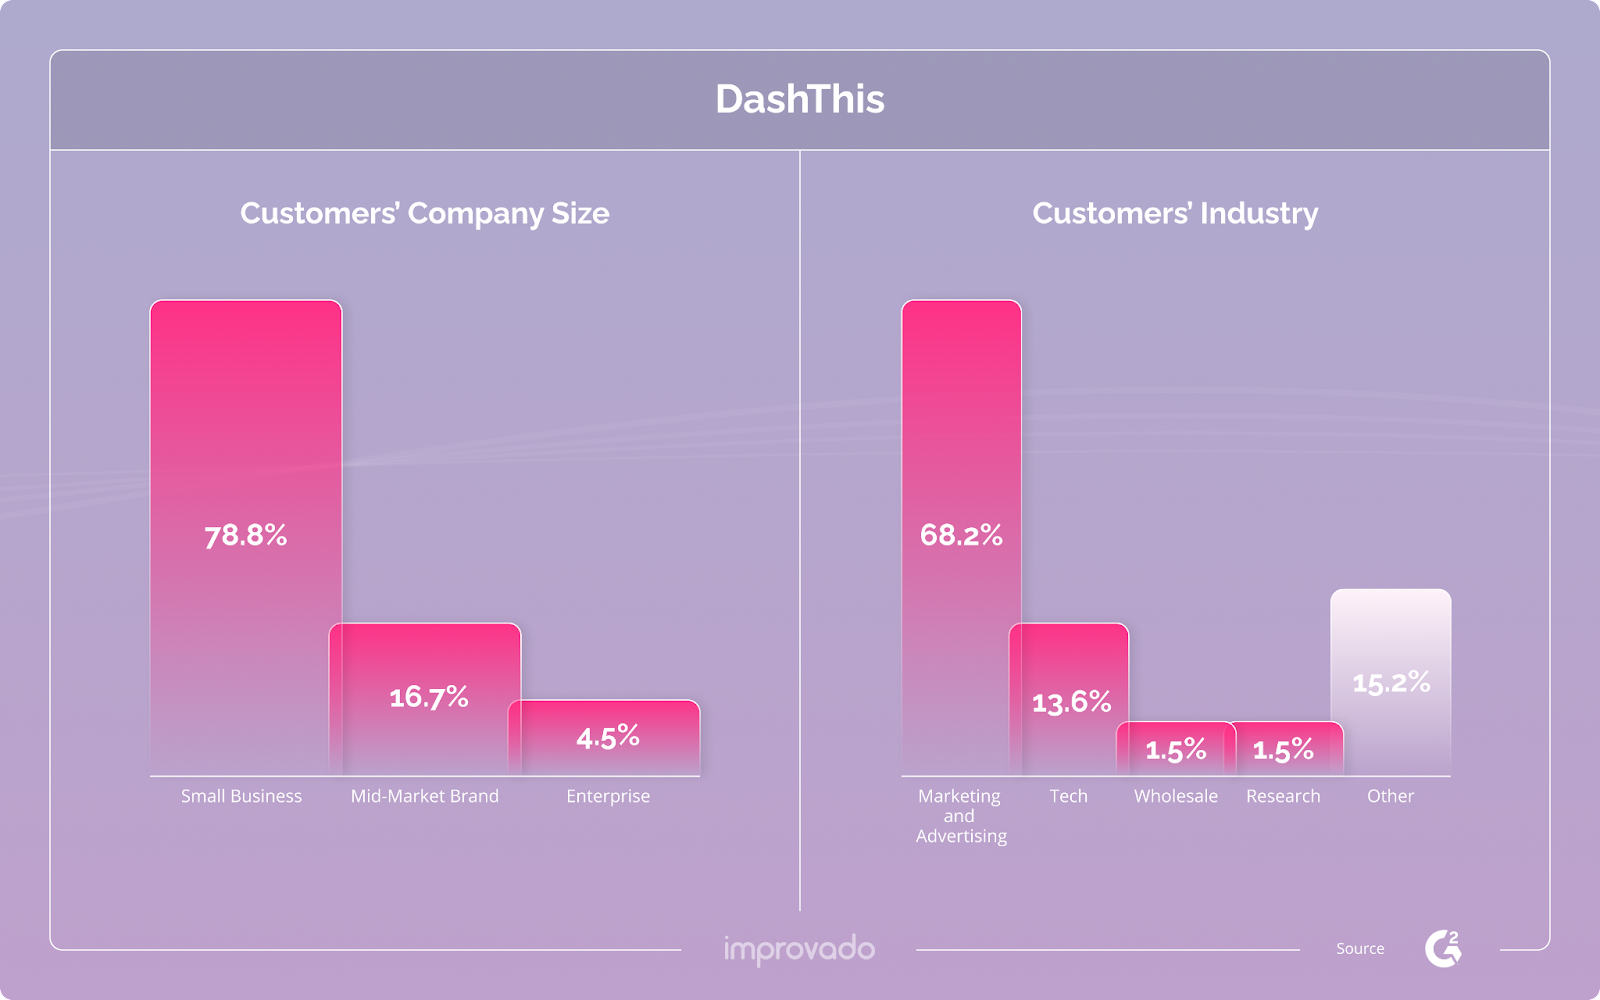 The majority of DashThis customers are small brands.